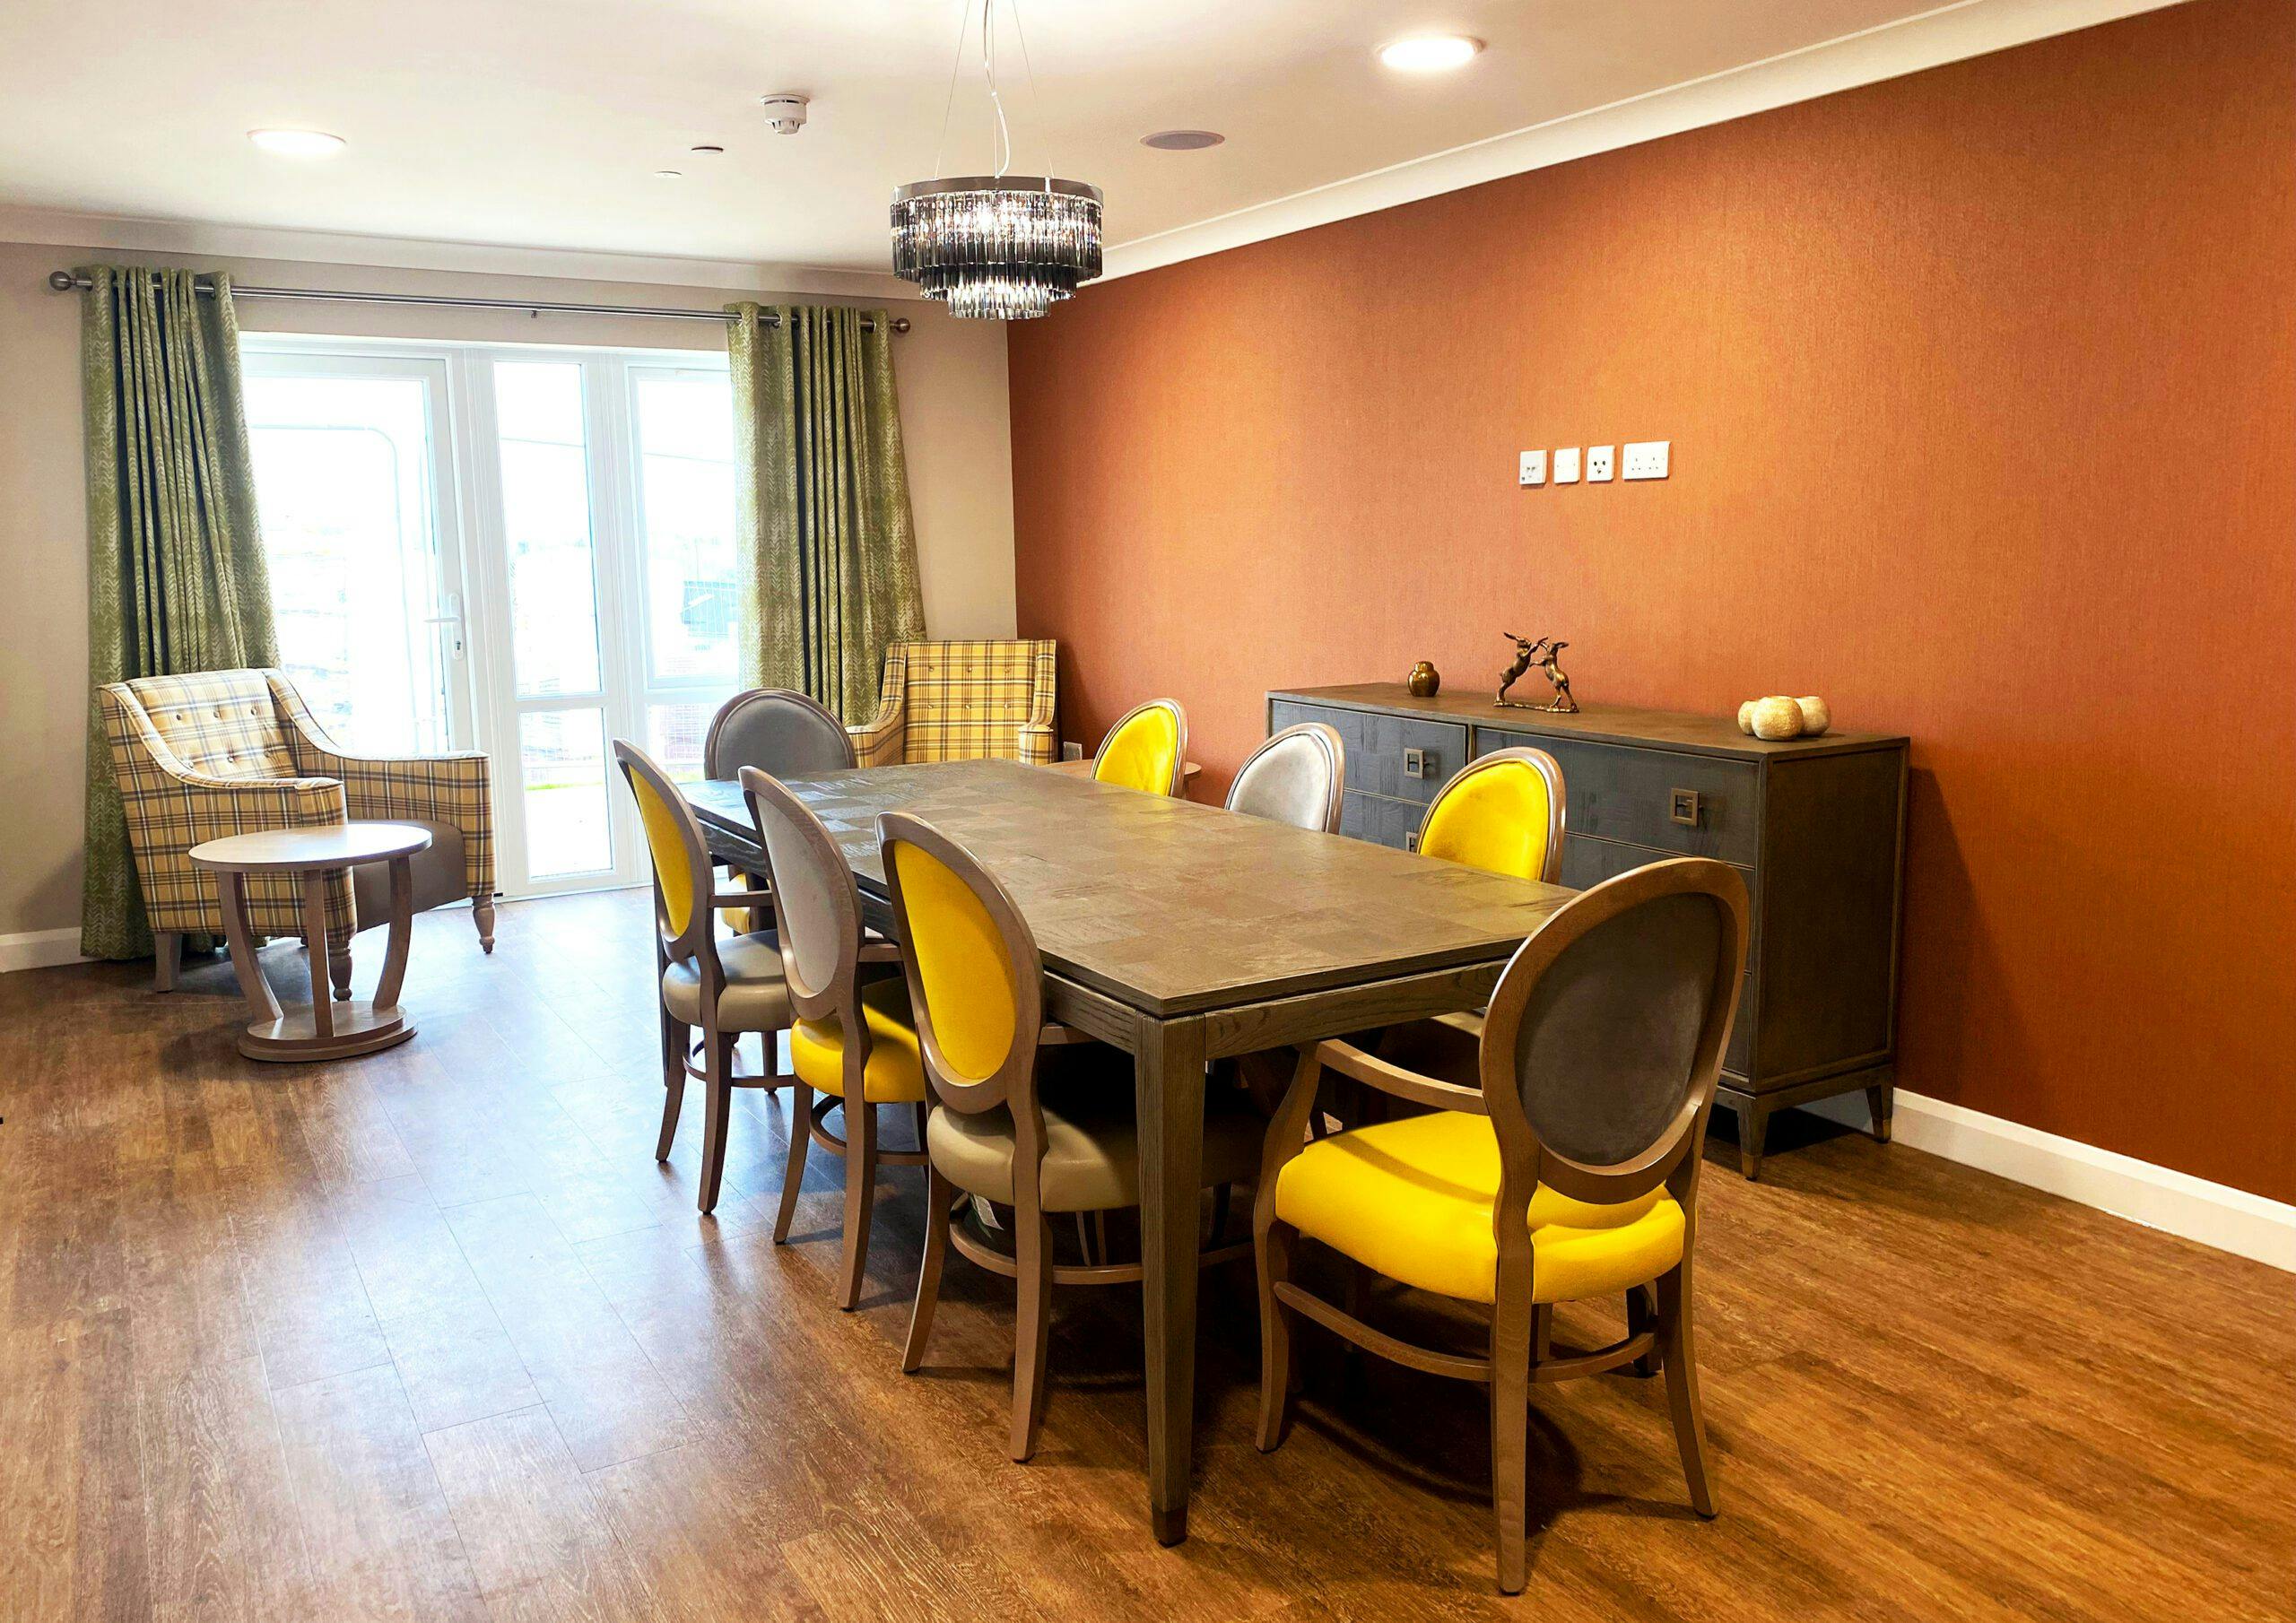 Dining area of Thimbleby Court care home in Horncastle, Lincolnshire